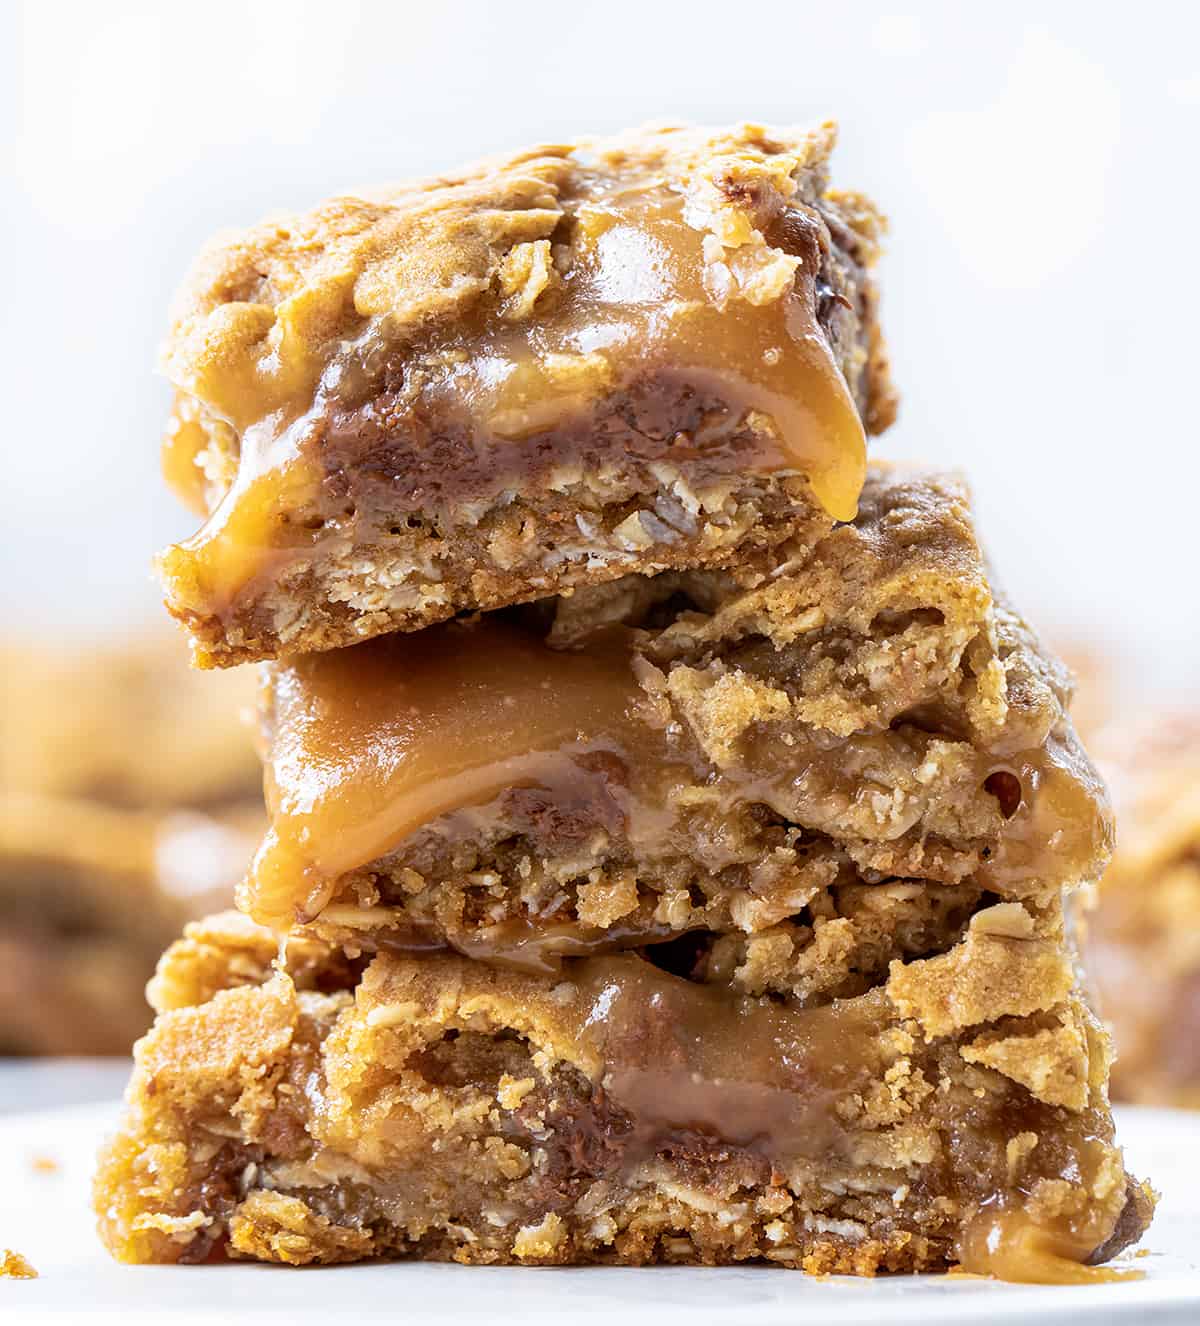 Chocolate Caramel Oatmeal Cookie Bars Stacked on Top of Each Other.